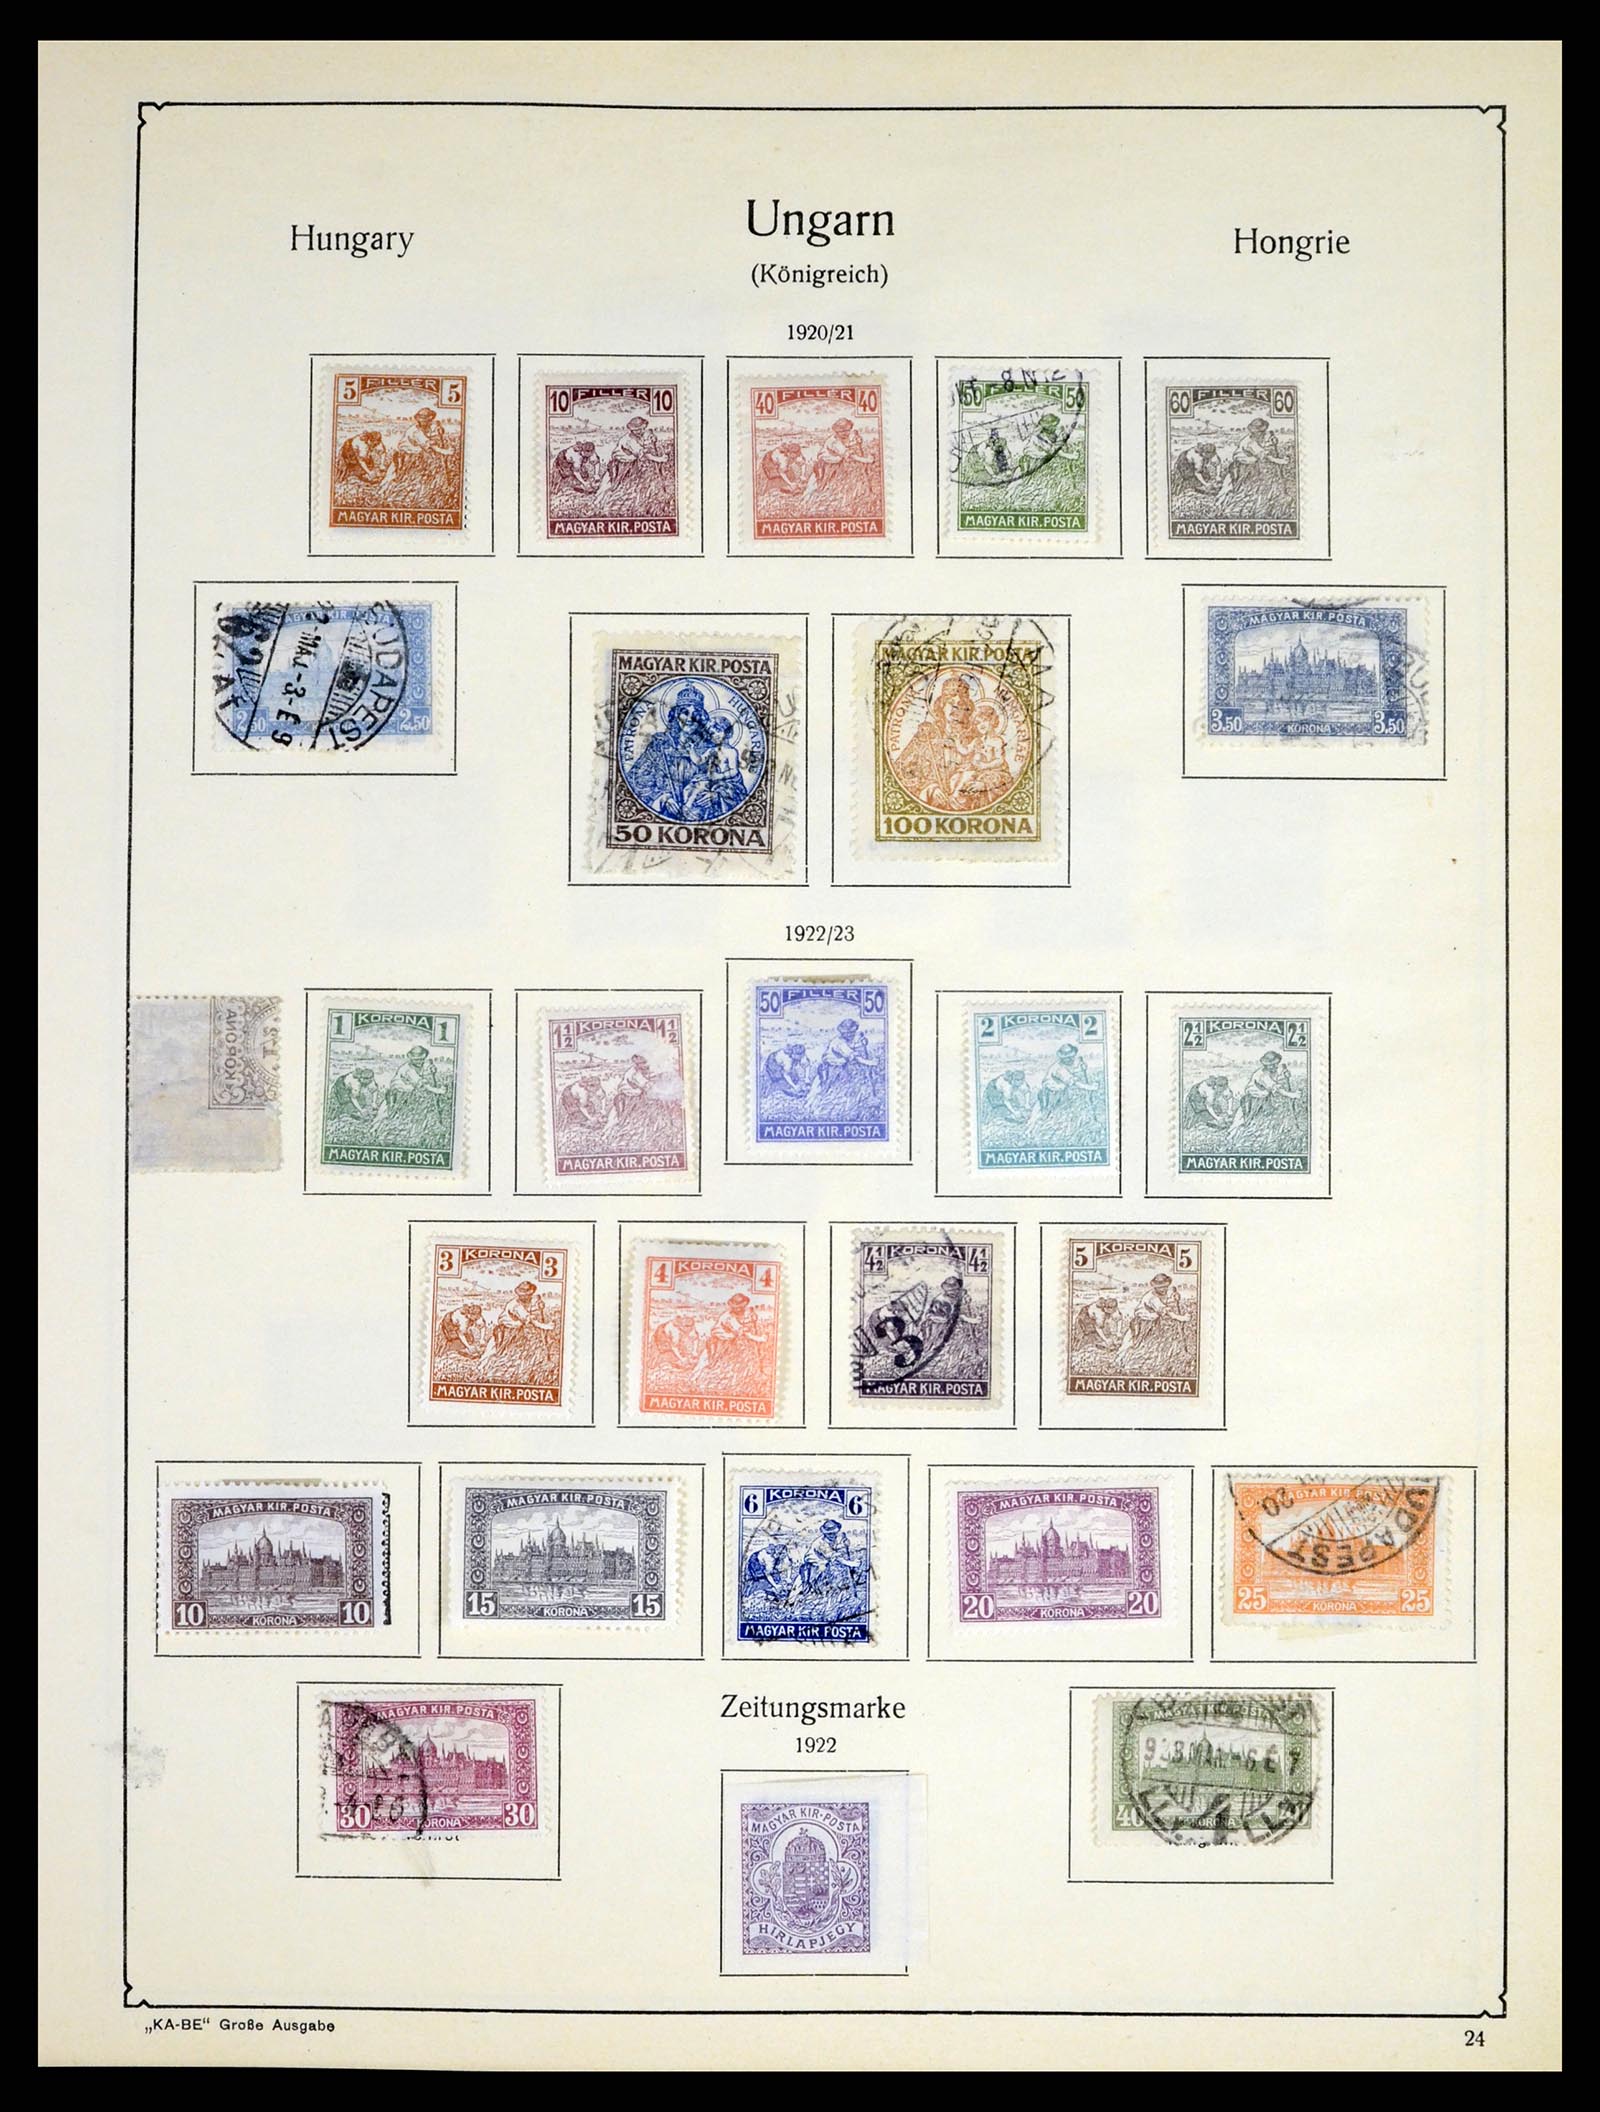 37398 038 - Stamp collection 37398 Hungary 1871-1960.